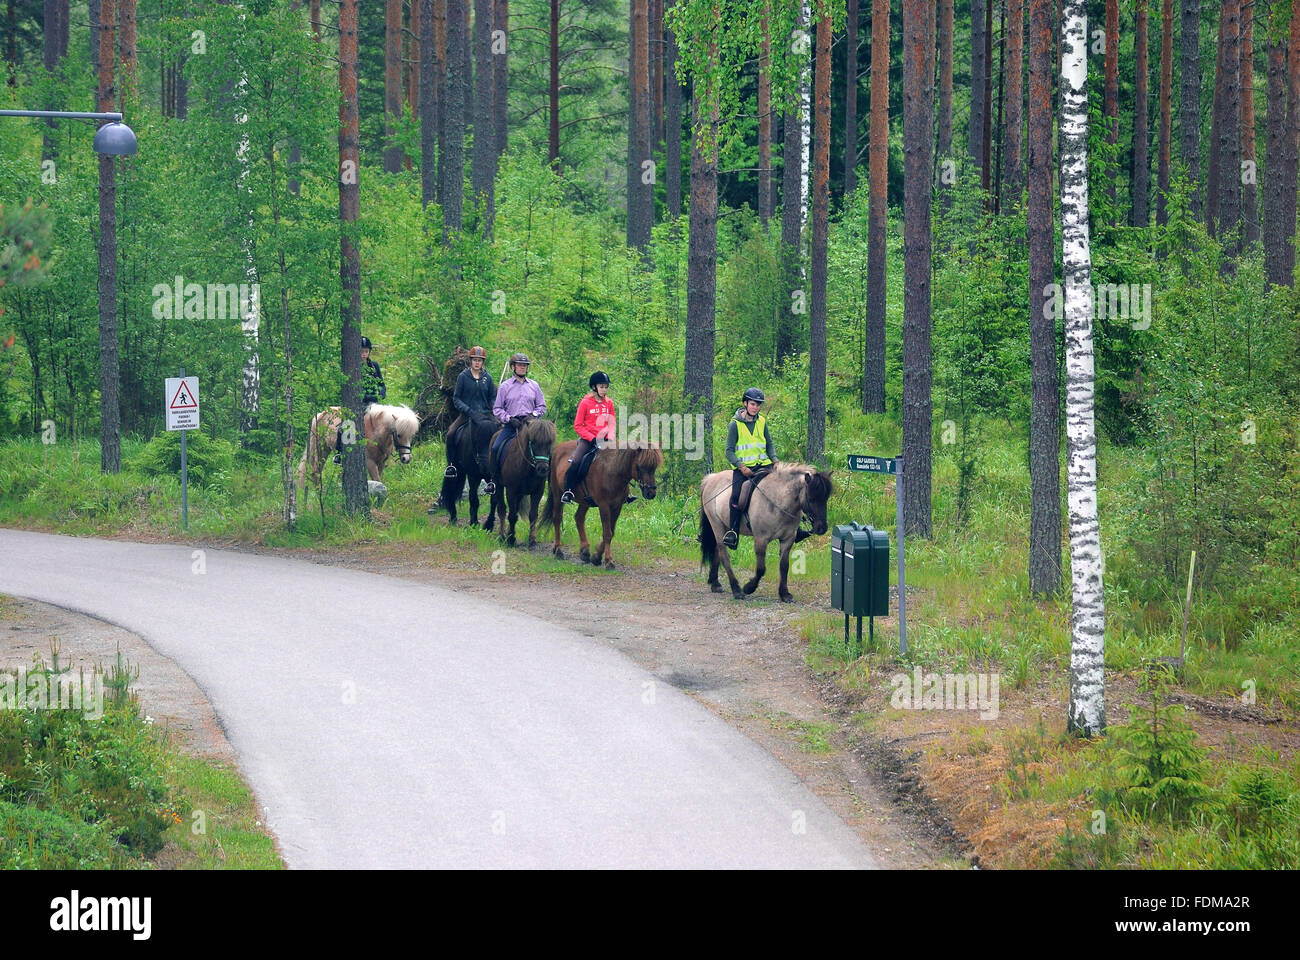 VIERUMAKI, FINLAND, June 23: A group of people at the lessons of riding in a sports complex Vierumaki, Finland, June 23, 2015. Stock Photo